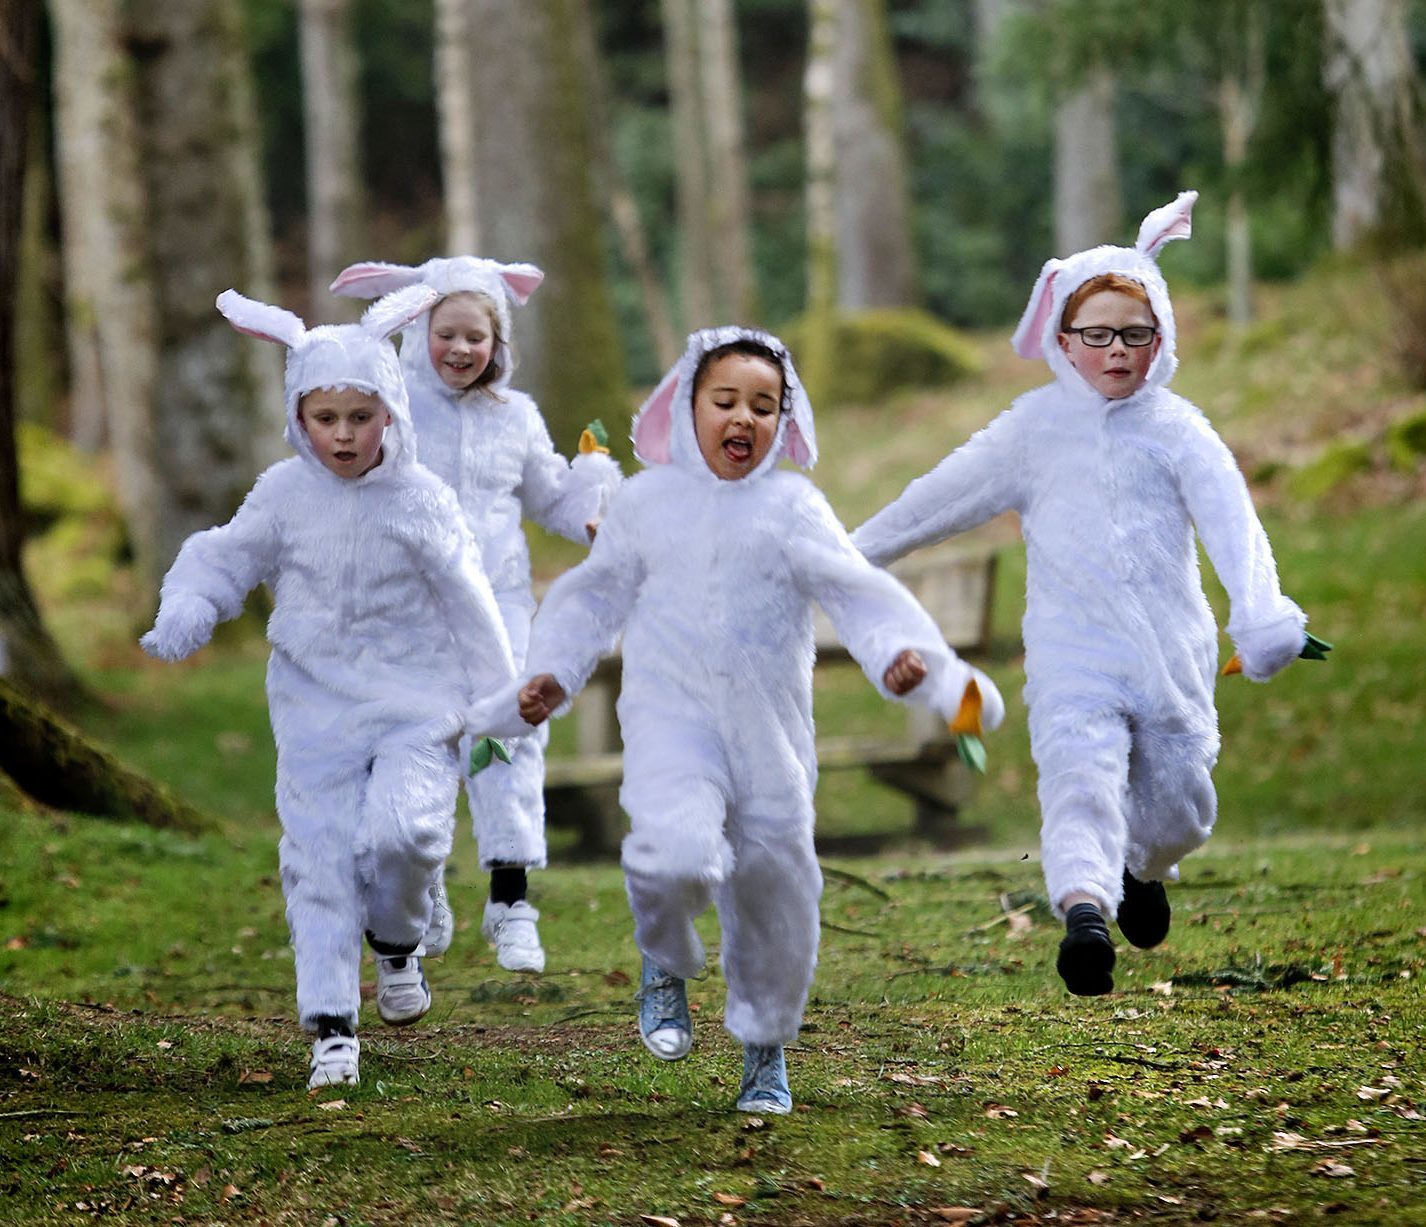 Easter Bunnies Mateusz Rozycki, Amelia Campbell, Gabriella Njuguna and Rory Hill from Hill of Banchory Primary get ready for the 10th annual Cadbury Egg Hunt at Crathes Castle in Aberdeenshire this Easter Weekend (14-17 April). Forty-seven National Trust for Scotland locations across Scotland will take part in the 2017 event, with over 36,000 chocolate treats on offer for participating children.